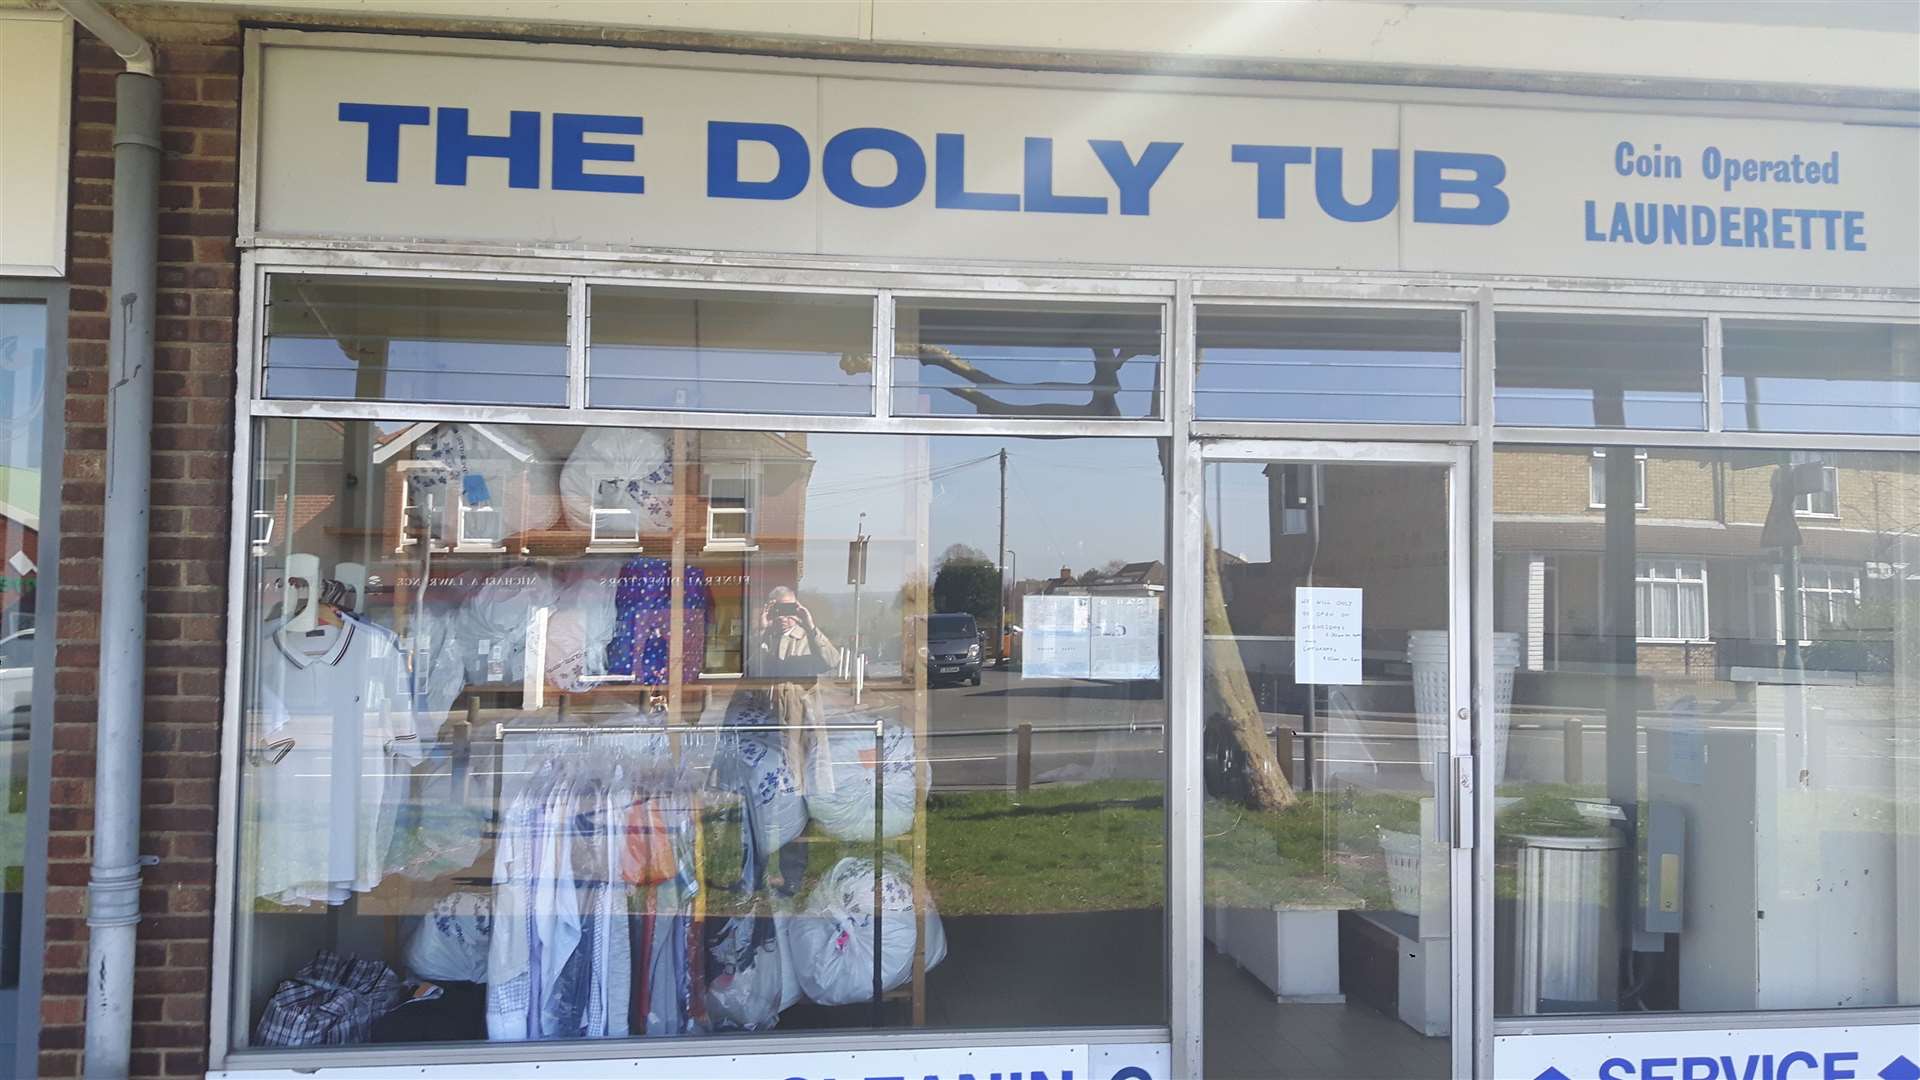 The Dolly Tub launderette in Boughton Parde has reduced its opening hours to just two days a week